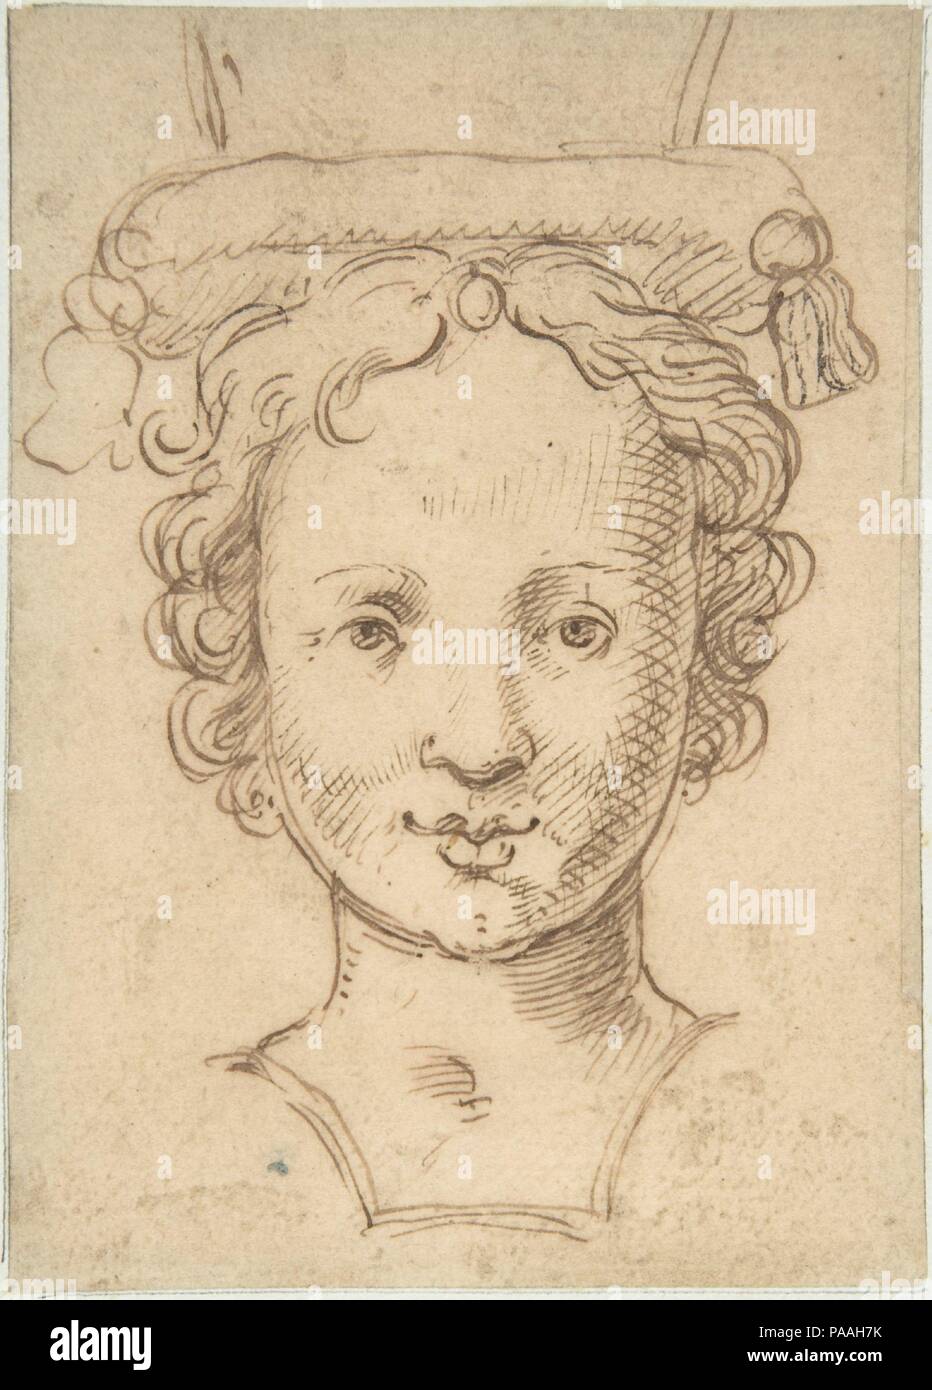 Head of a Young Woman, a Probable Finial for Fountain or other Type of Waterwork. Artist: Anonymous, Italian, Sienese or Marchigian, 16th century. Dimensions: sheet: 4 13/16 x 3 7/16 in. (12.2 x 8.7 cm). Date: 16th century. Museum: Metropolitan Museum of Art, New York, USA. Stock Photo